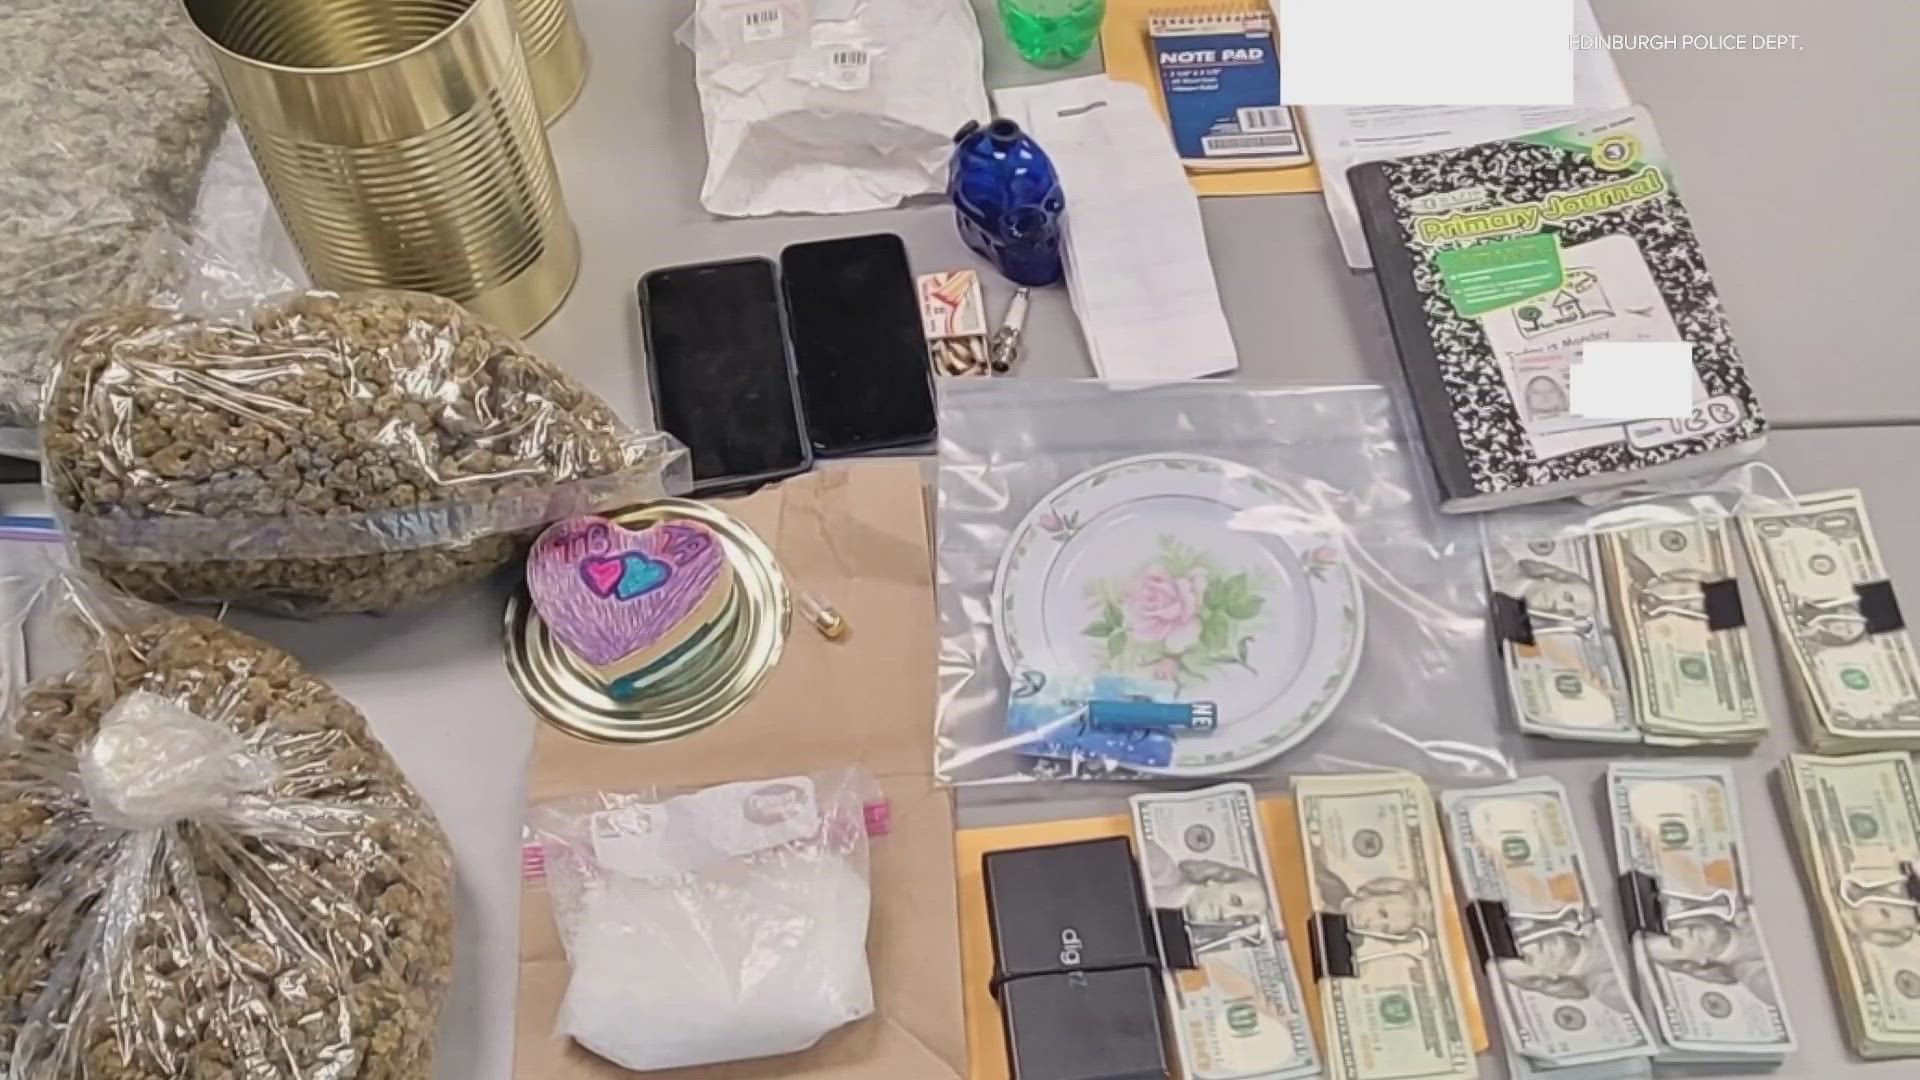 The drug bust comes after a four-month-long investigation, police said.